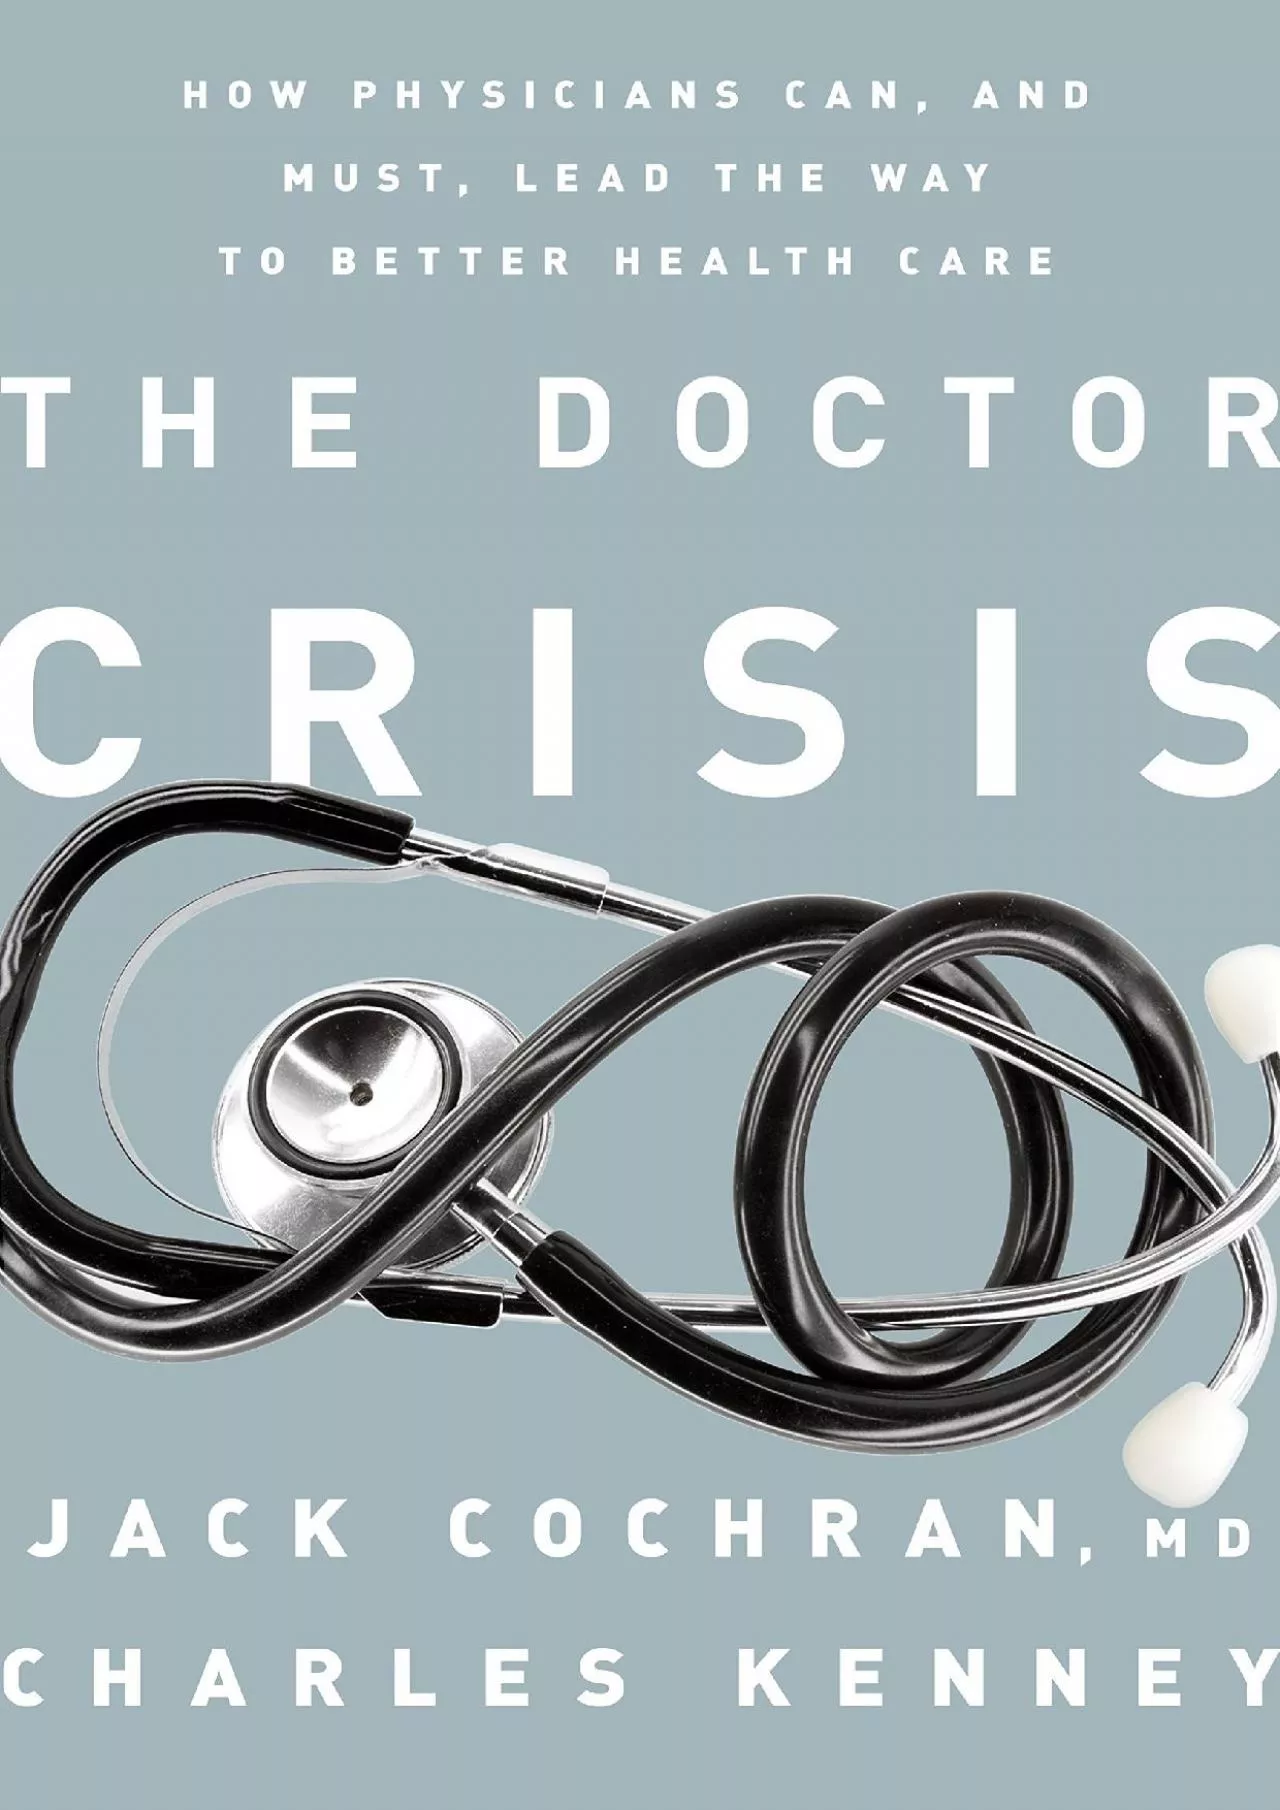 (BOOS)-The Doctor Crisis: How Physicians Can, and Must, Lead the Way to Better Health